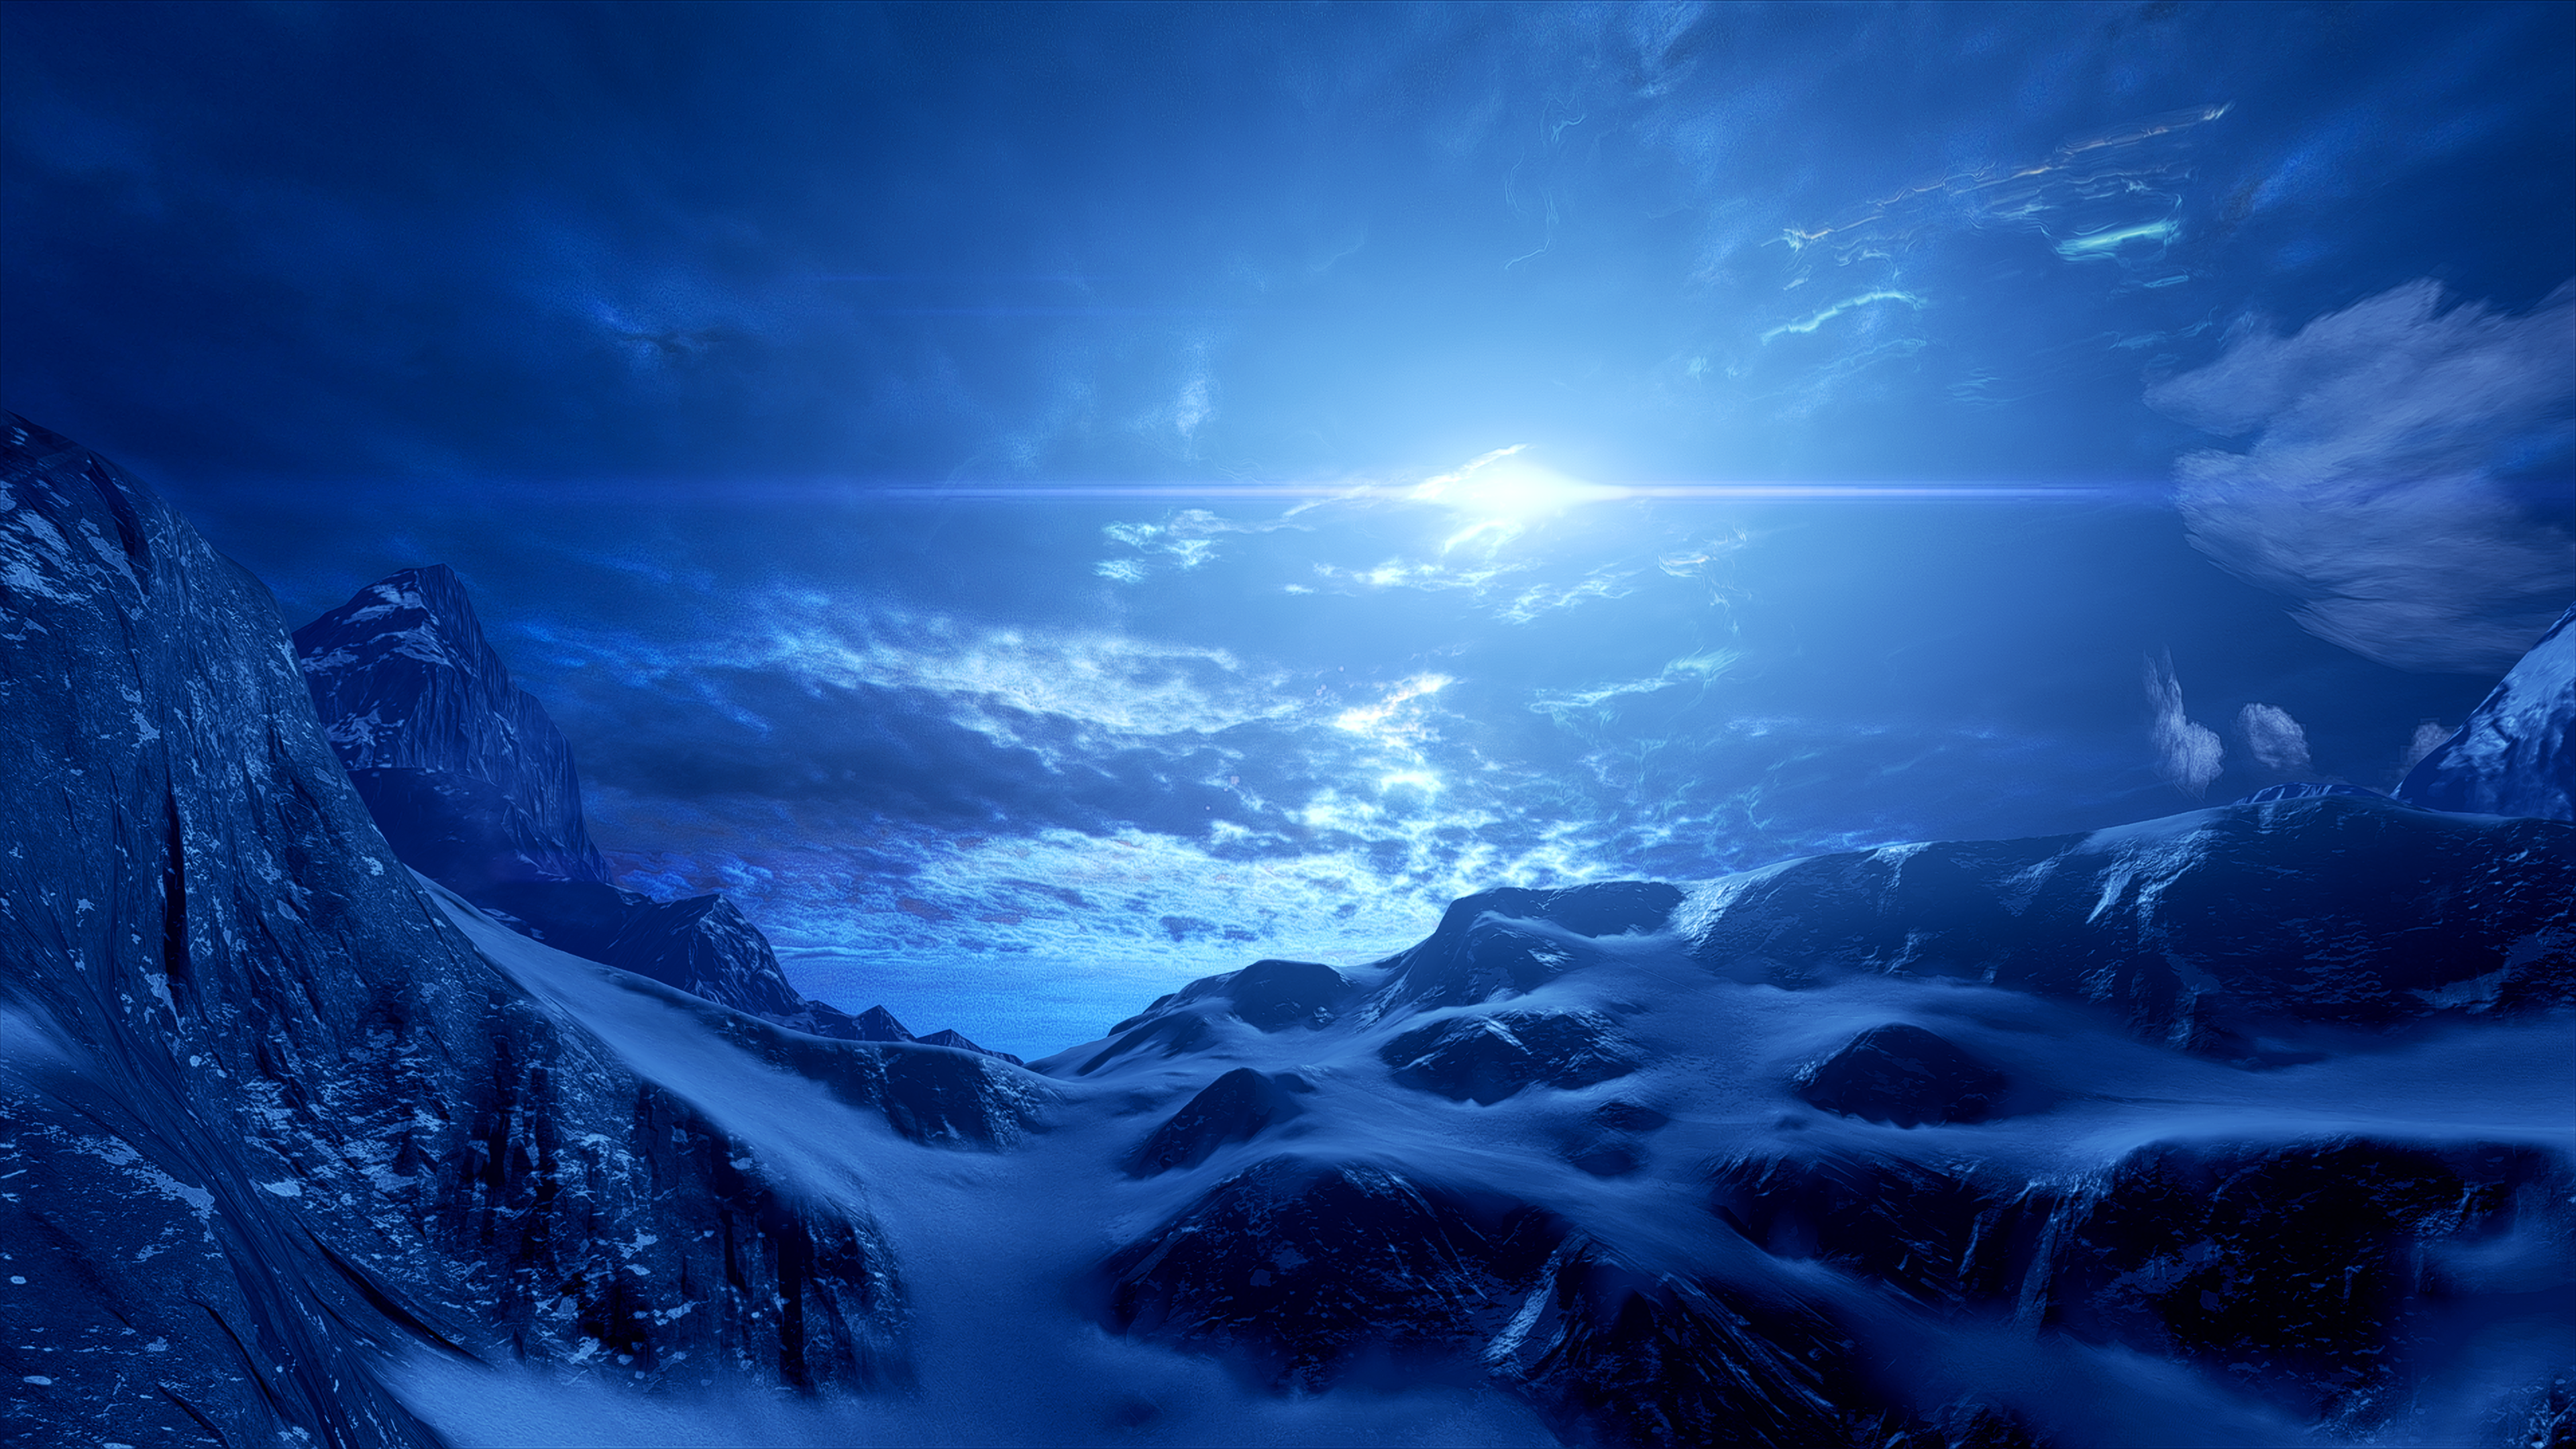 General 3840x2160 Mass Effect: Andromeda mountains sky Sun cold snow landscape rocks space clouds blue video games PC gaming science fiction ice